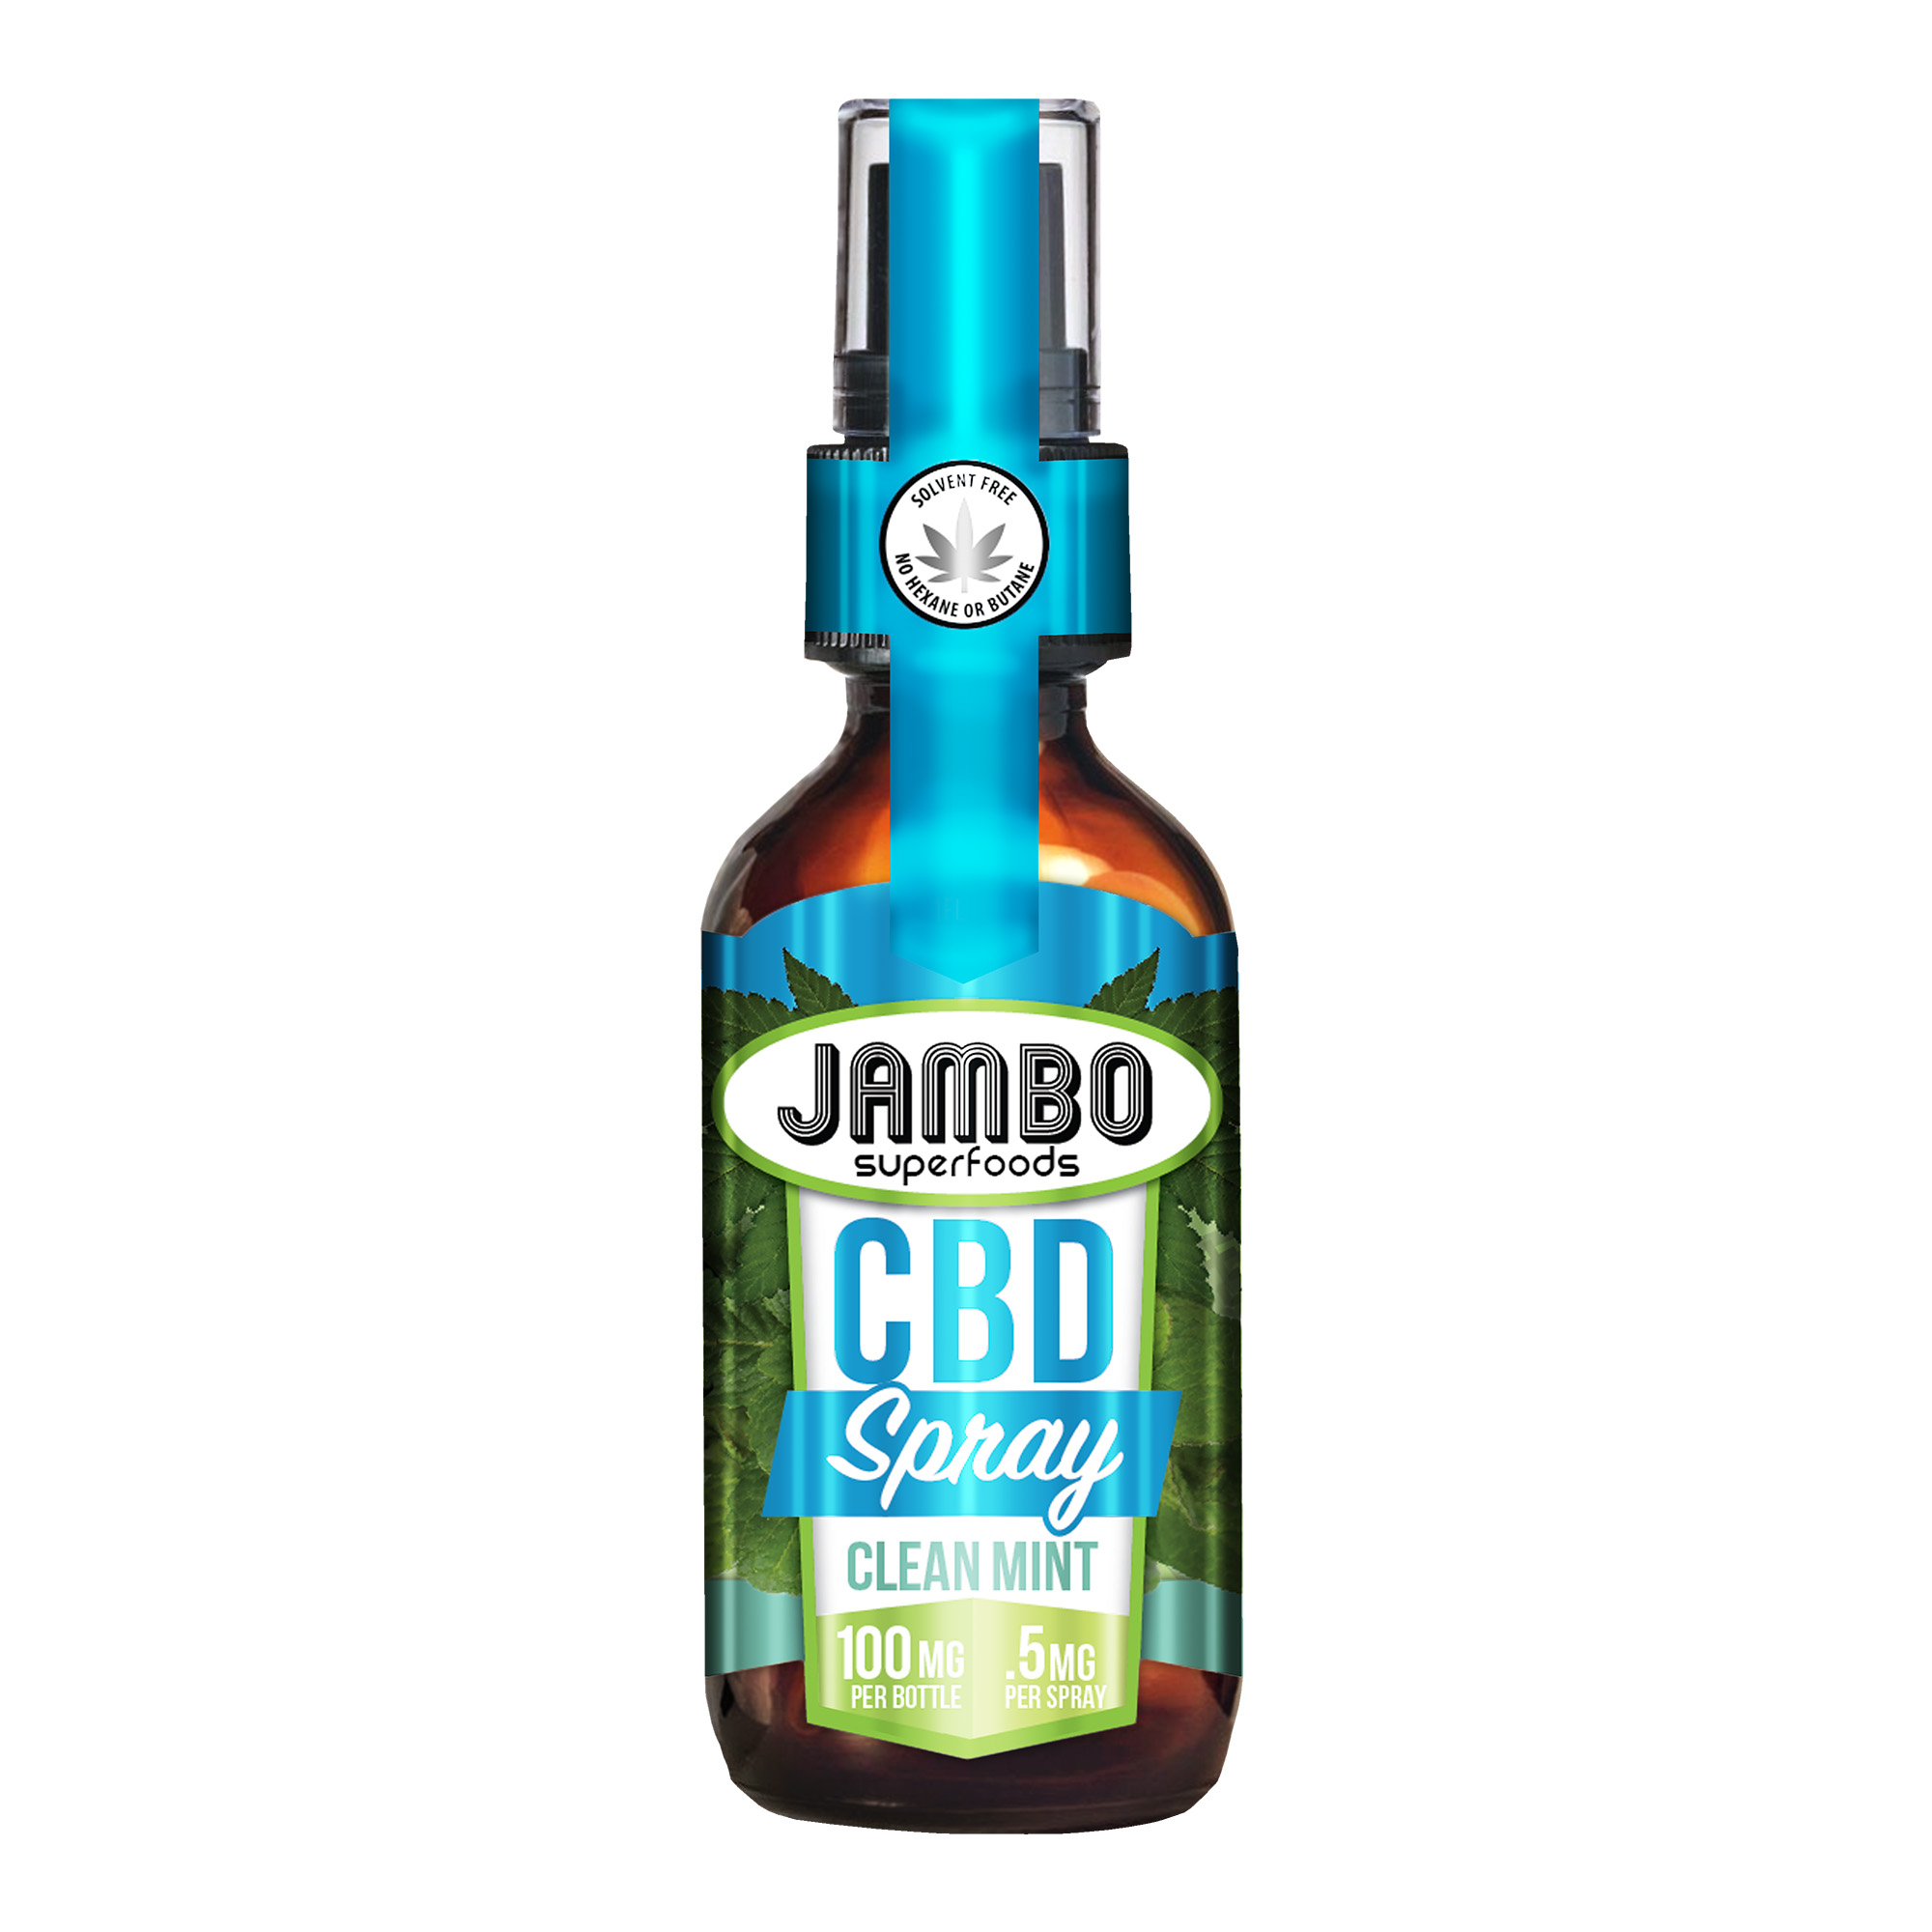 Jambo Superfoods CBD clean mint spray product image